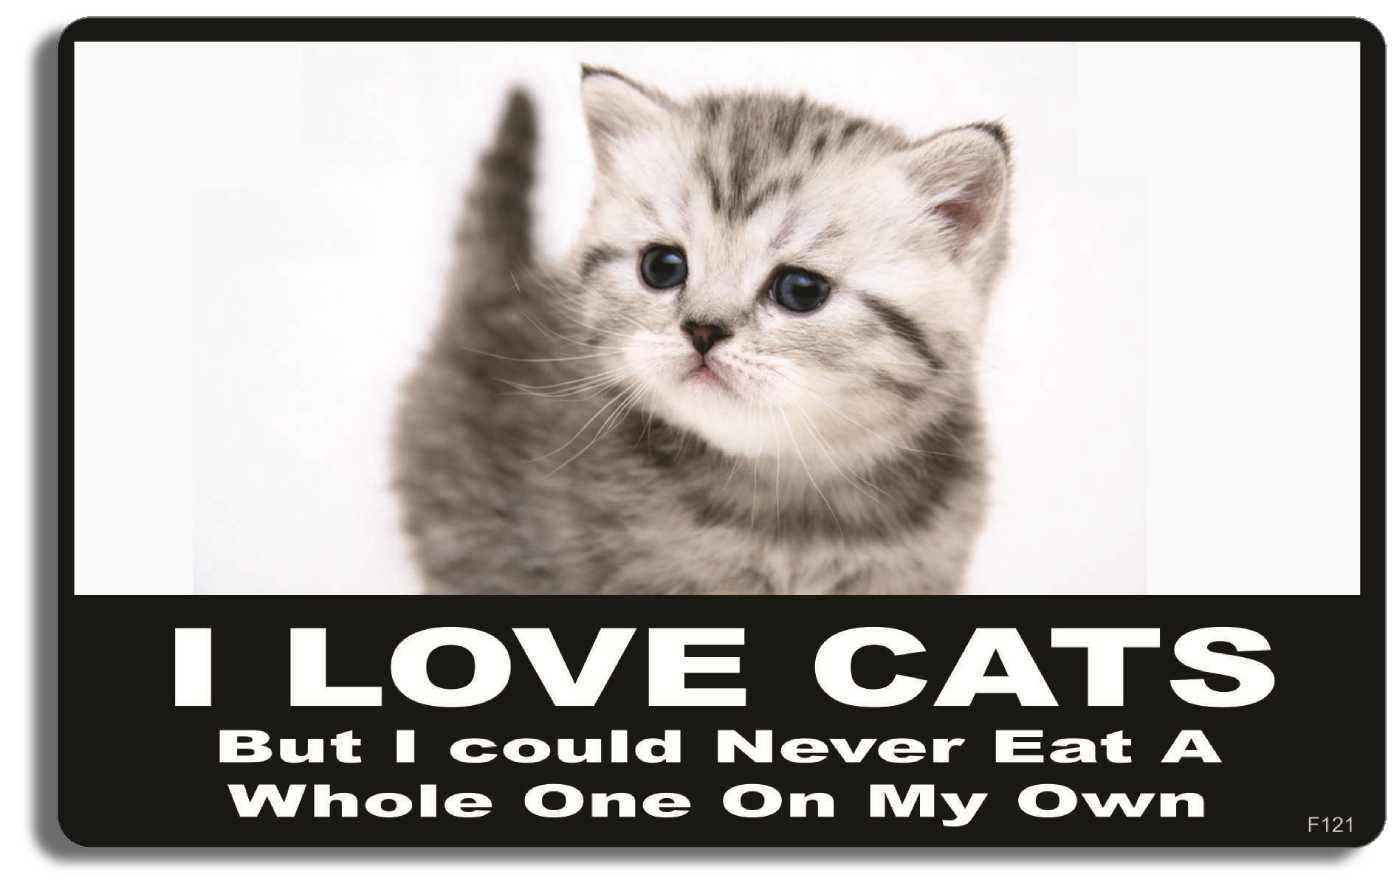 I love cats, but I could never eat a whole one on my own - 3.75" x 6" Bumper Sticker--Car Magnet- -  Decal Bumper Sticker-funny Bumper Sticker Car Magnet I love cats, but I could never eat-  Decal for carsCats